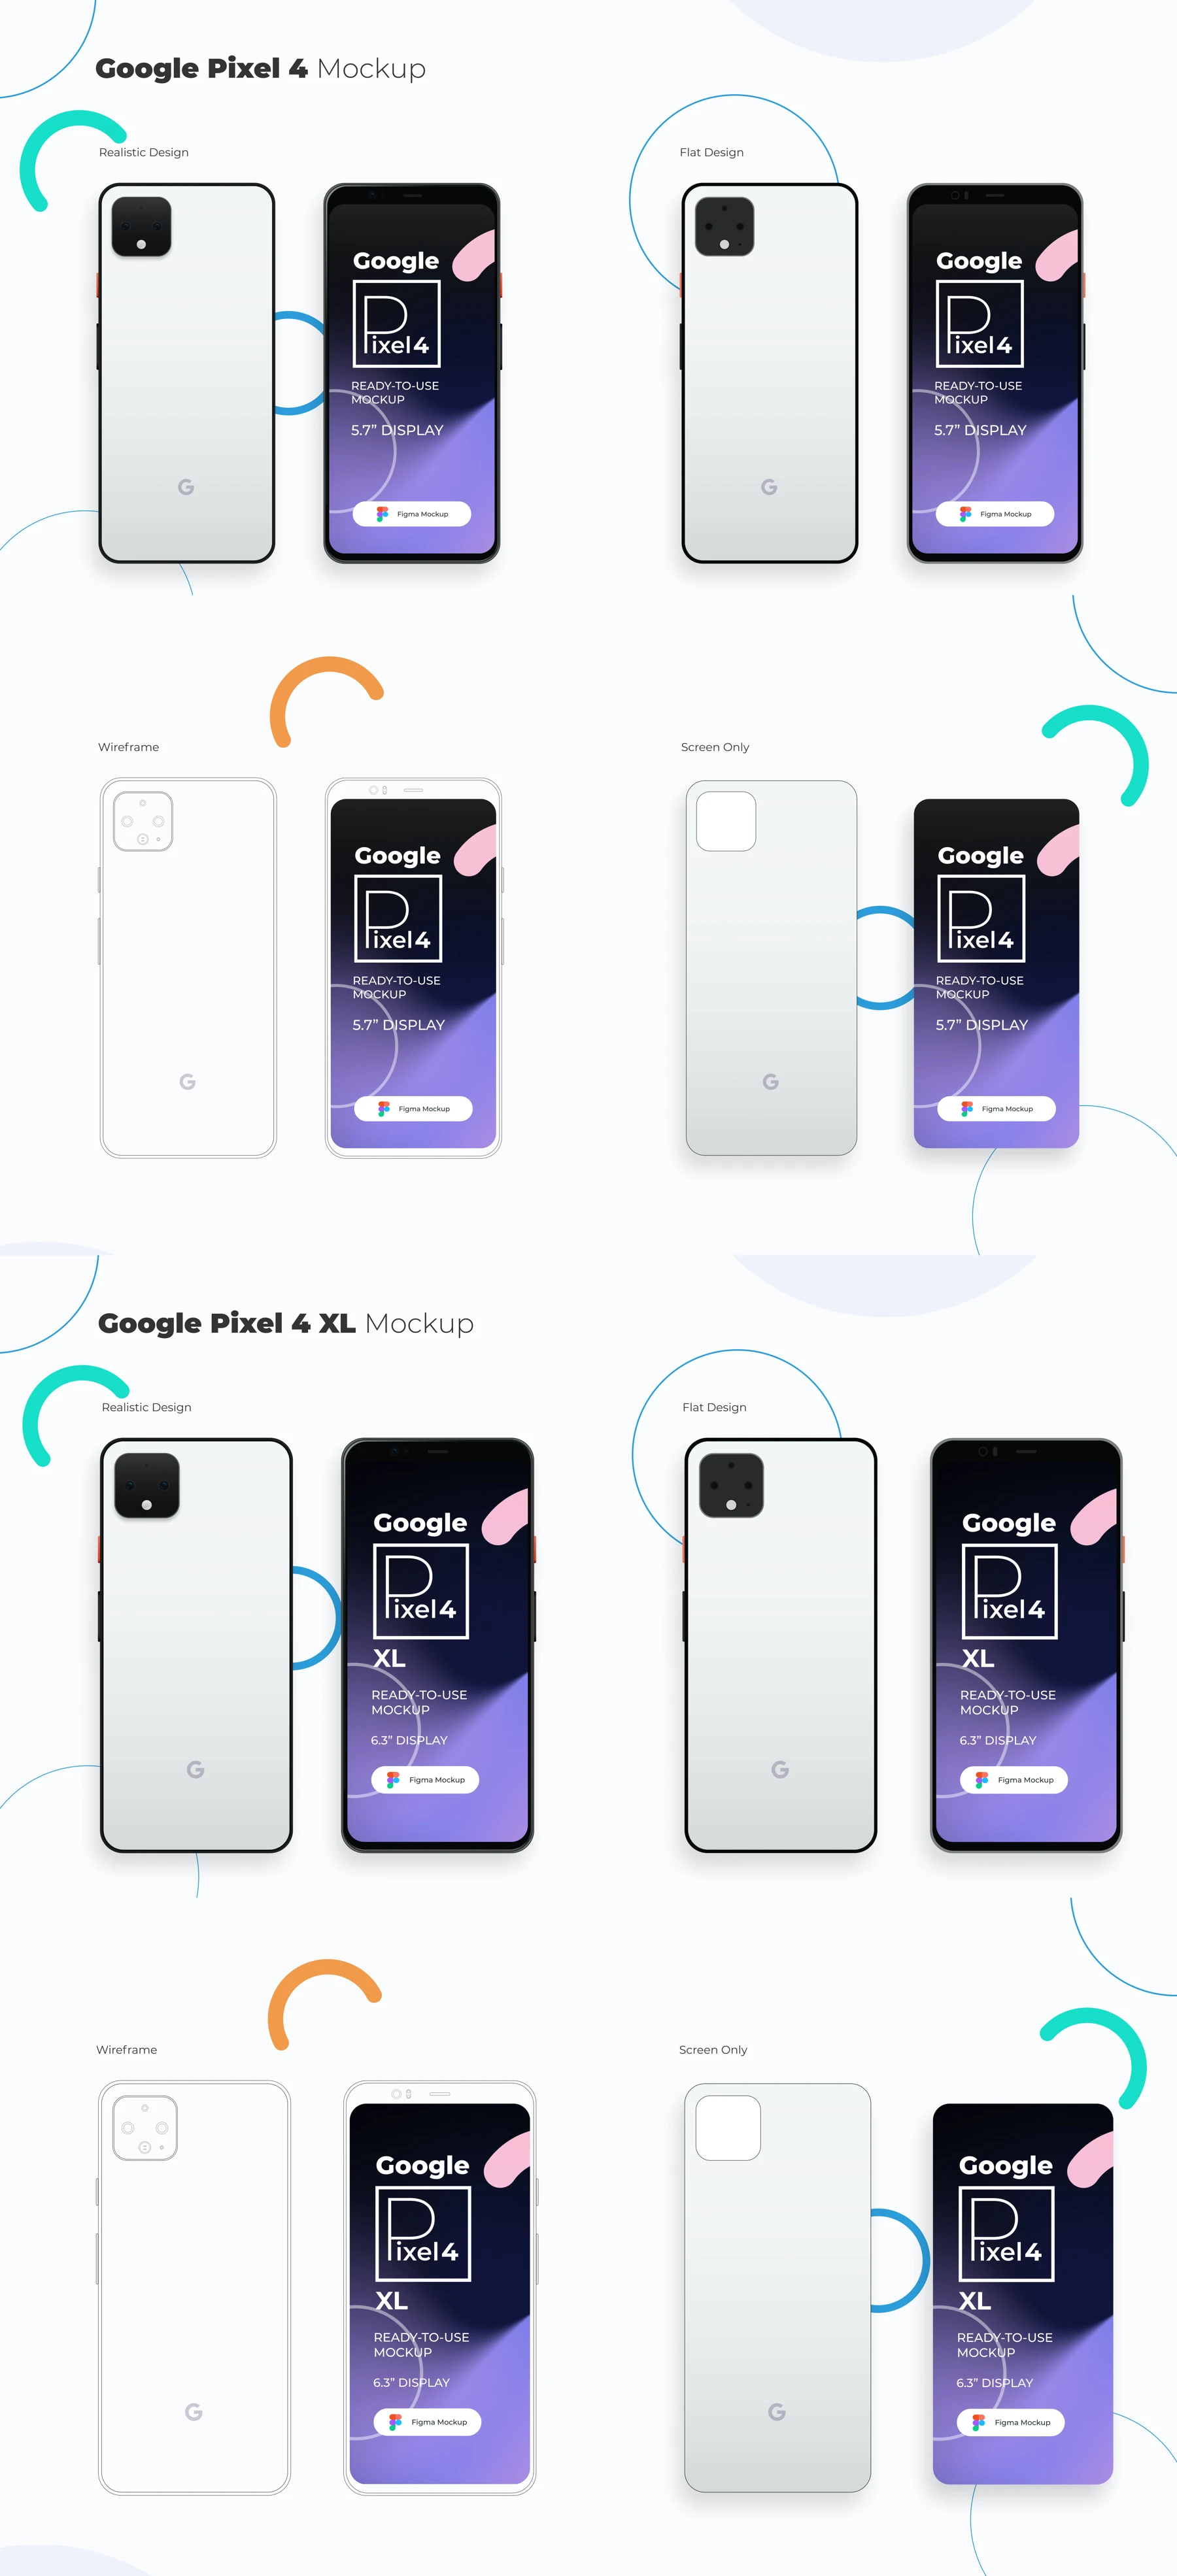 Google Pixel 4 and 4 XL mockup for Figma